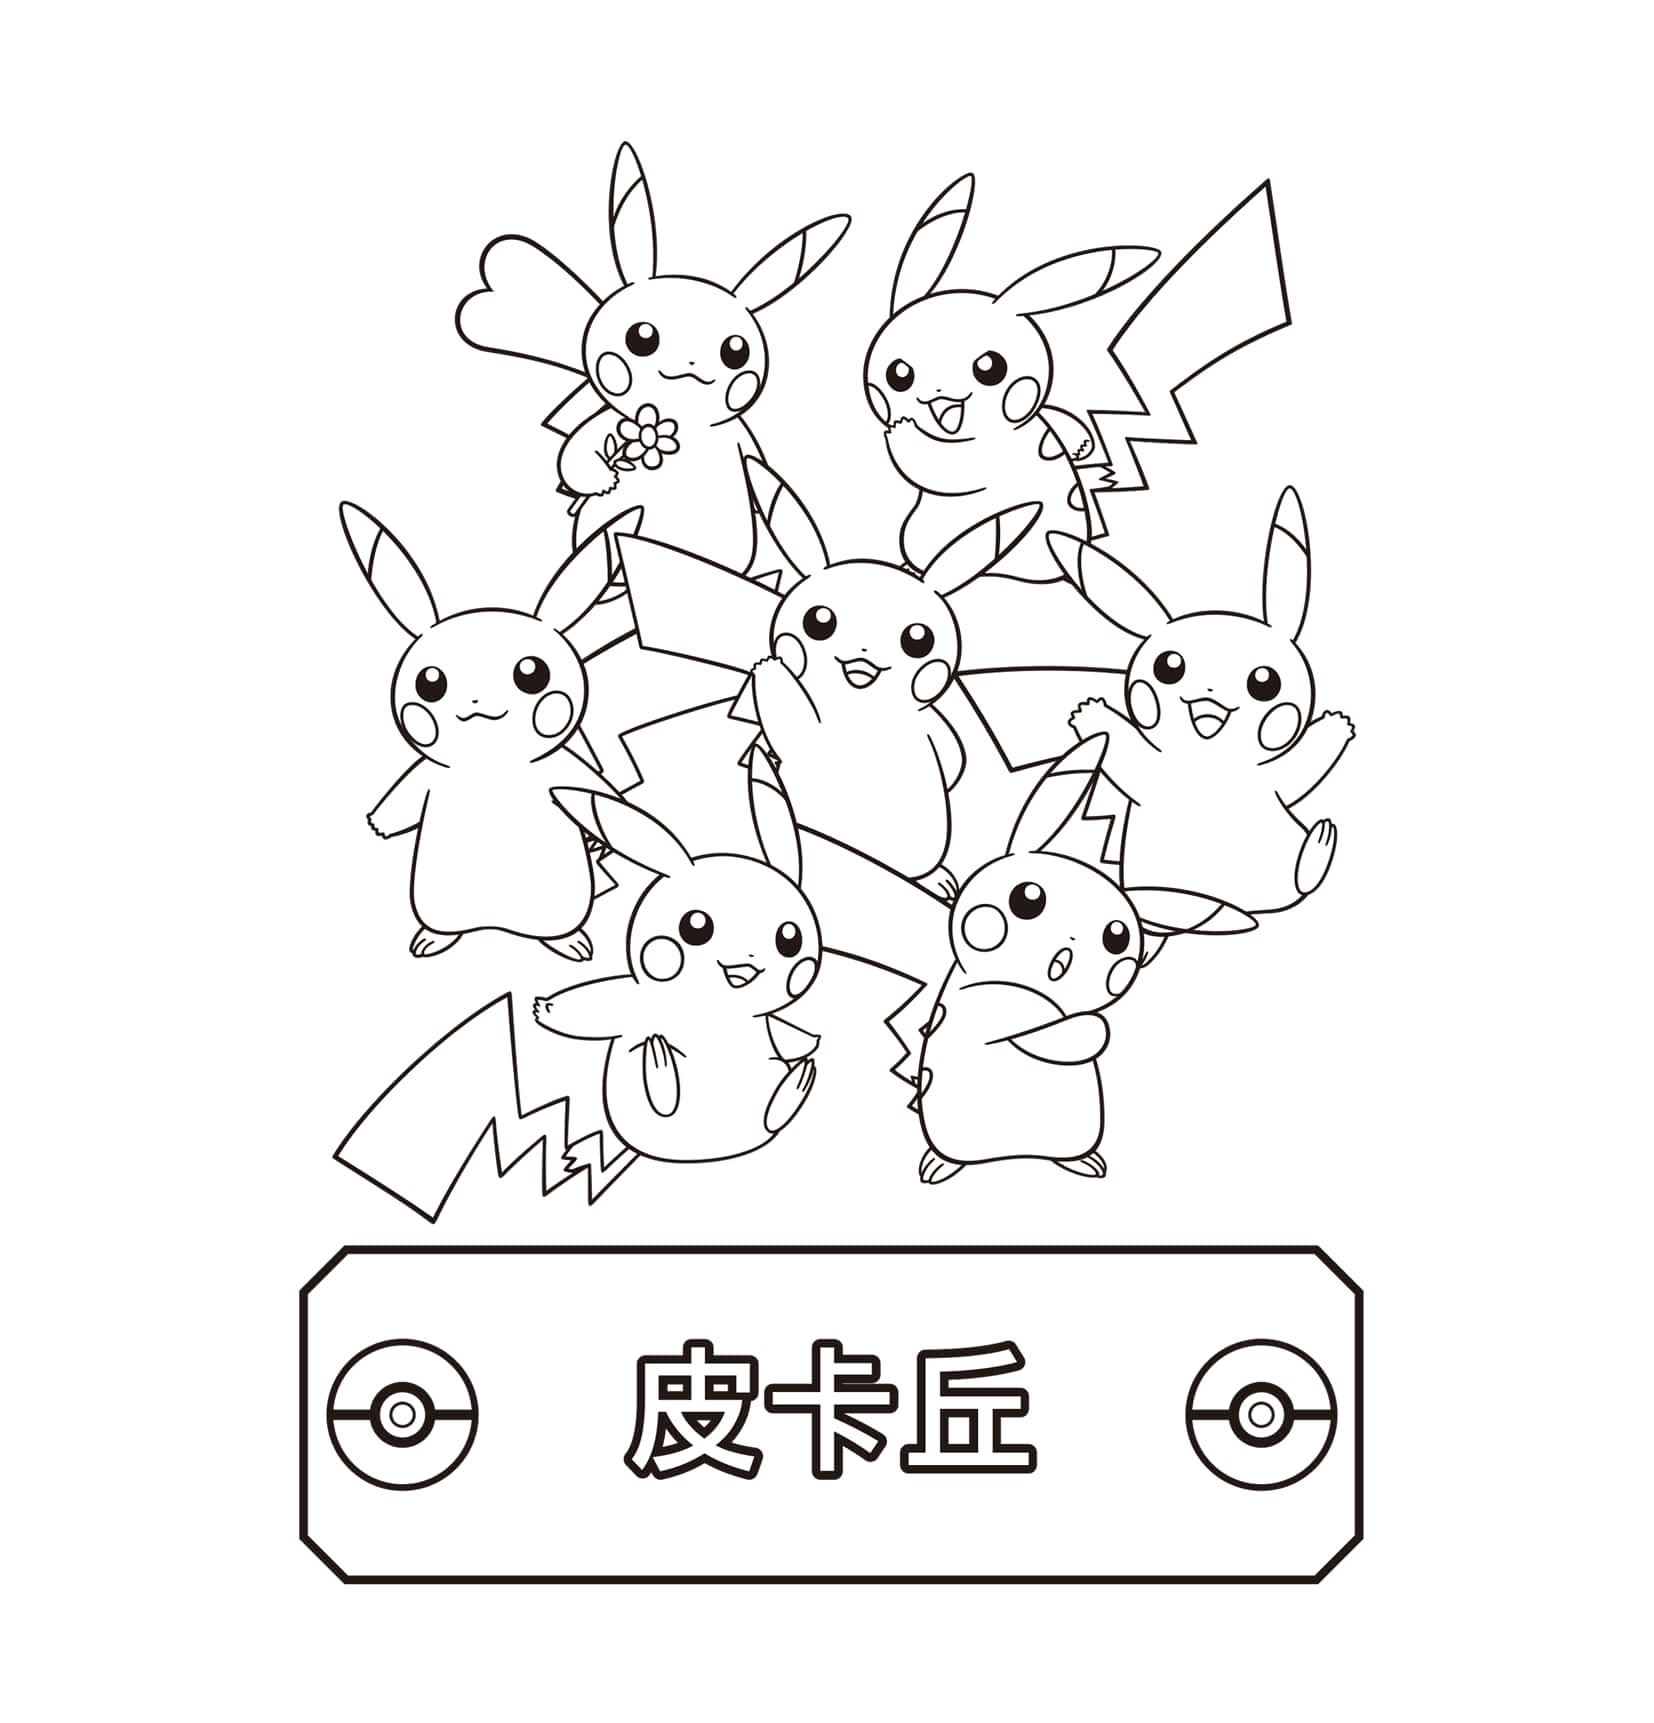 Enjoy Hours of Fun with Pokemon Coloring